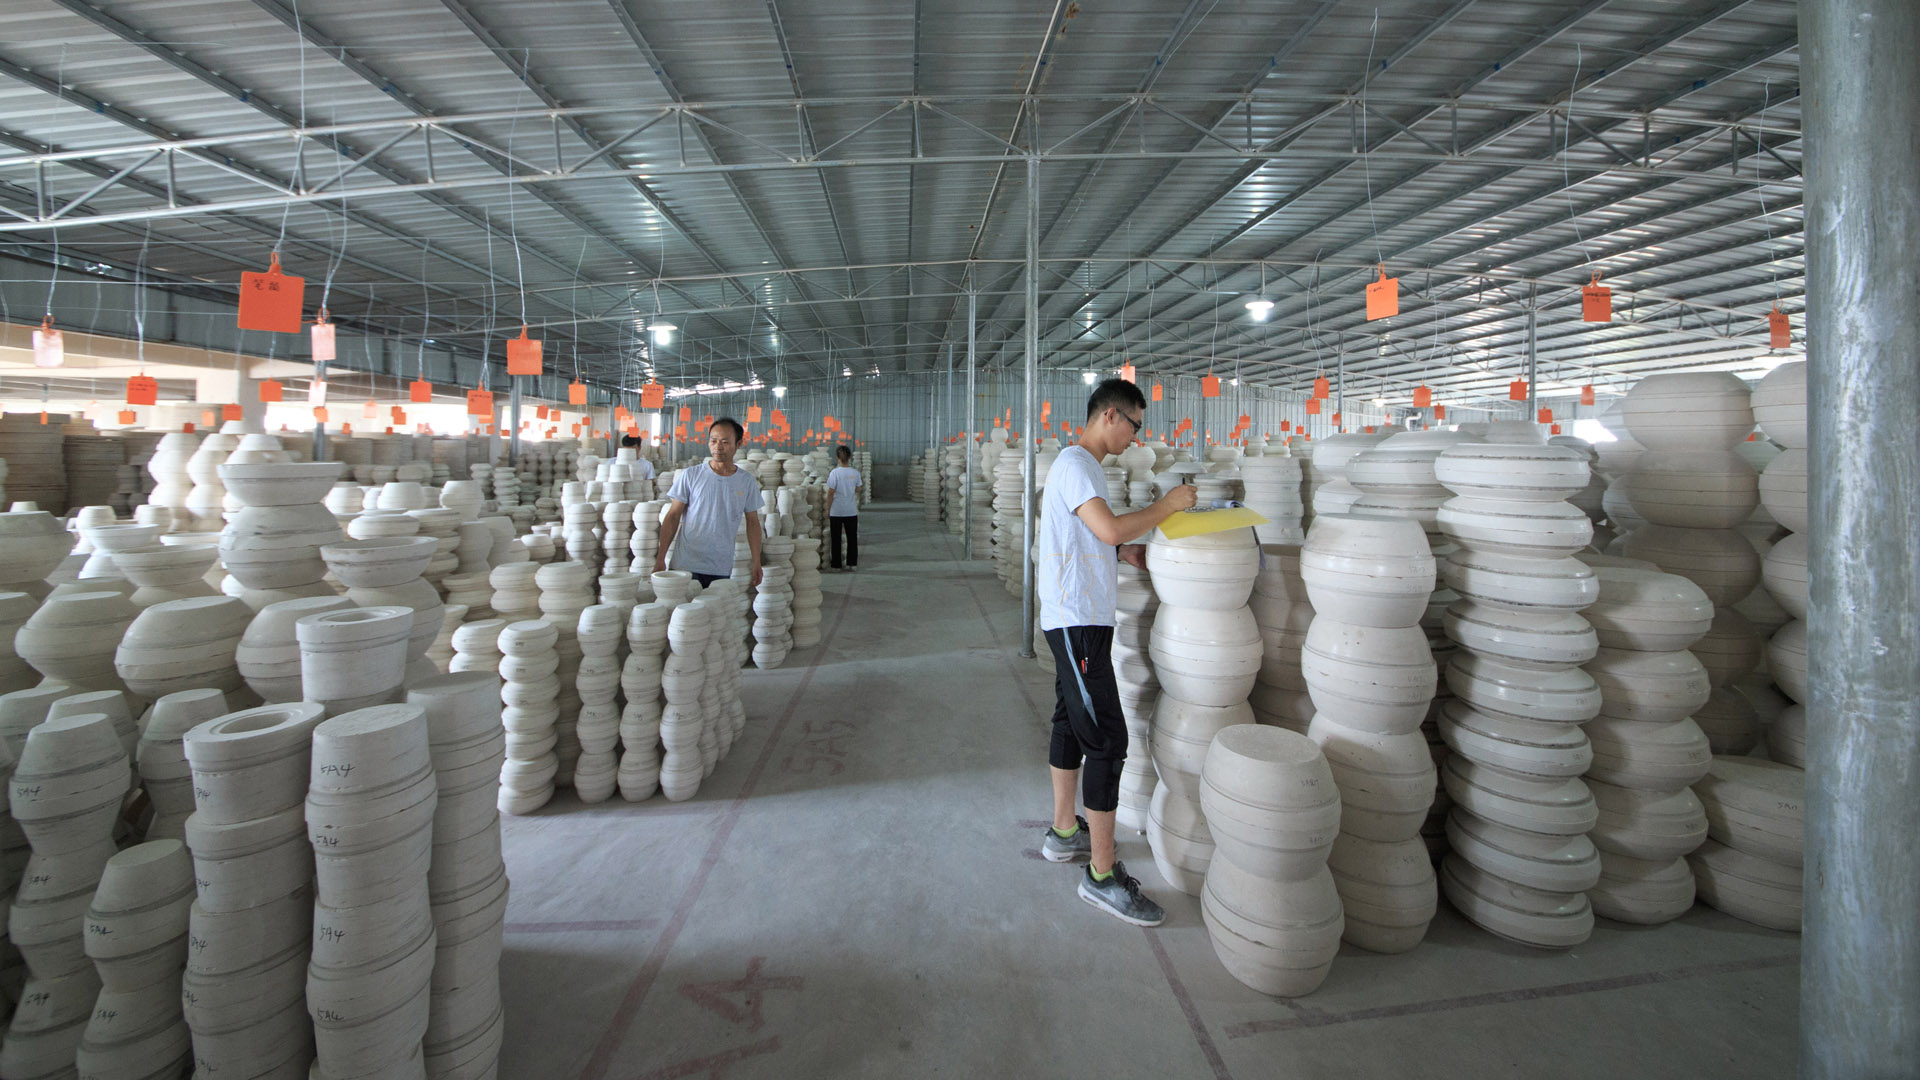 The second floor of the two eight Ceramics Factory - Molded Warehouse